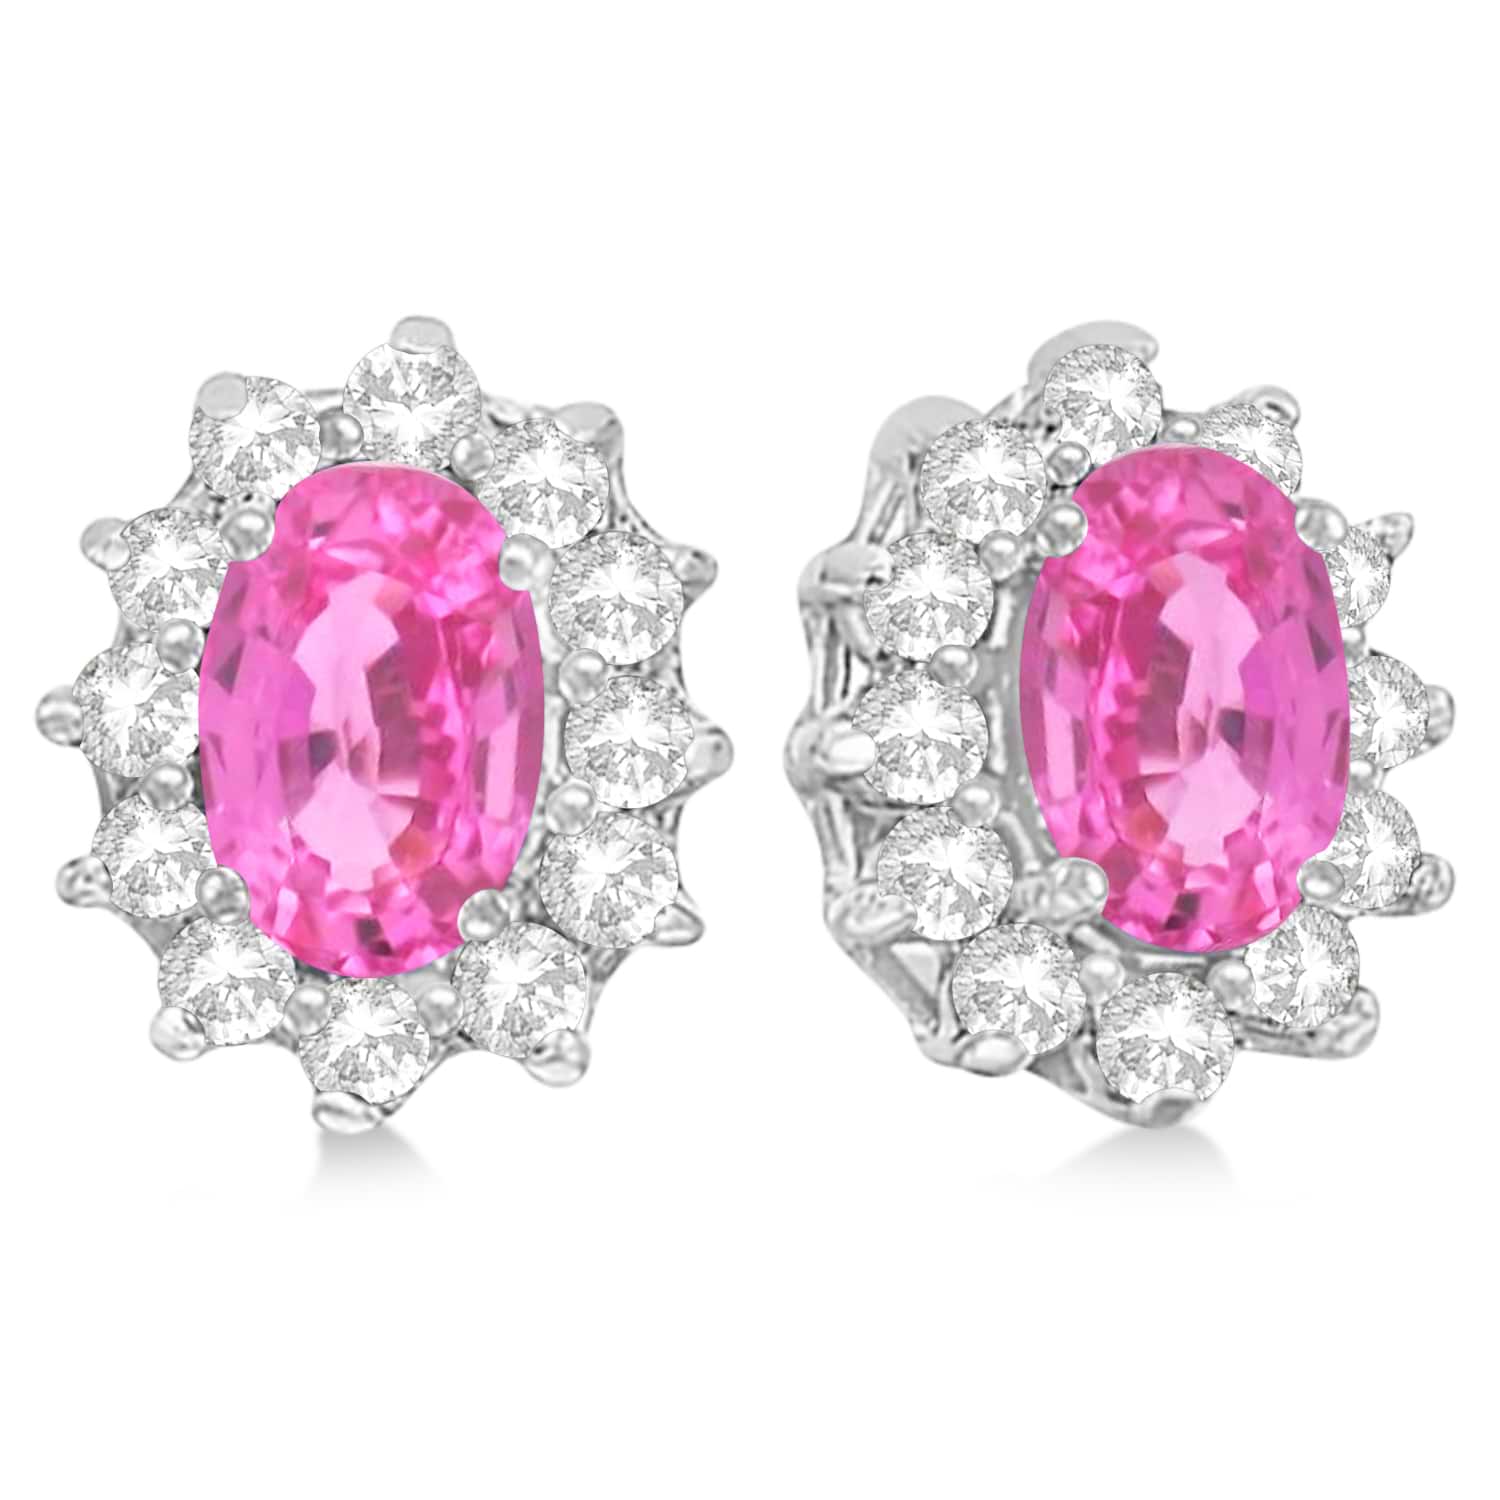 Oval Pink Sapphire & Diamond Accented Earrings 14k White Gold (2.05ct)